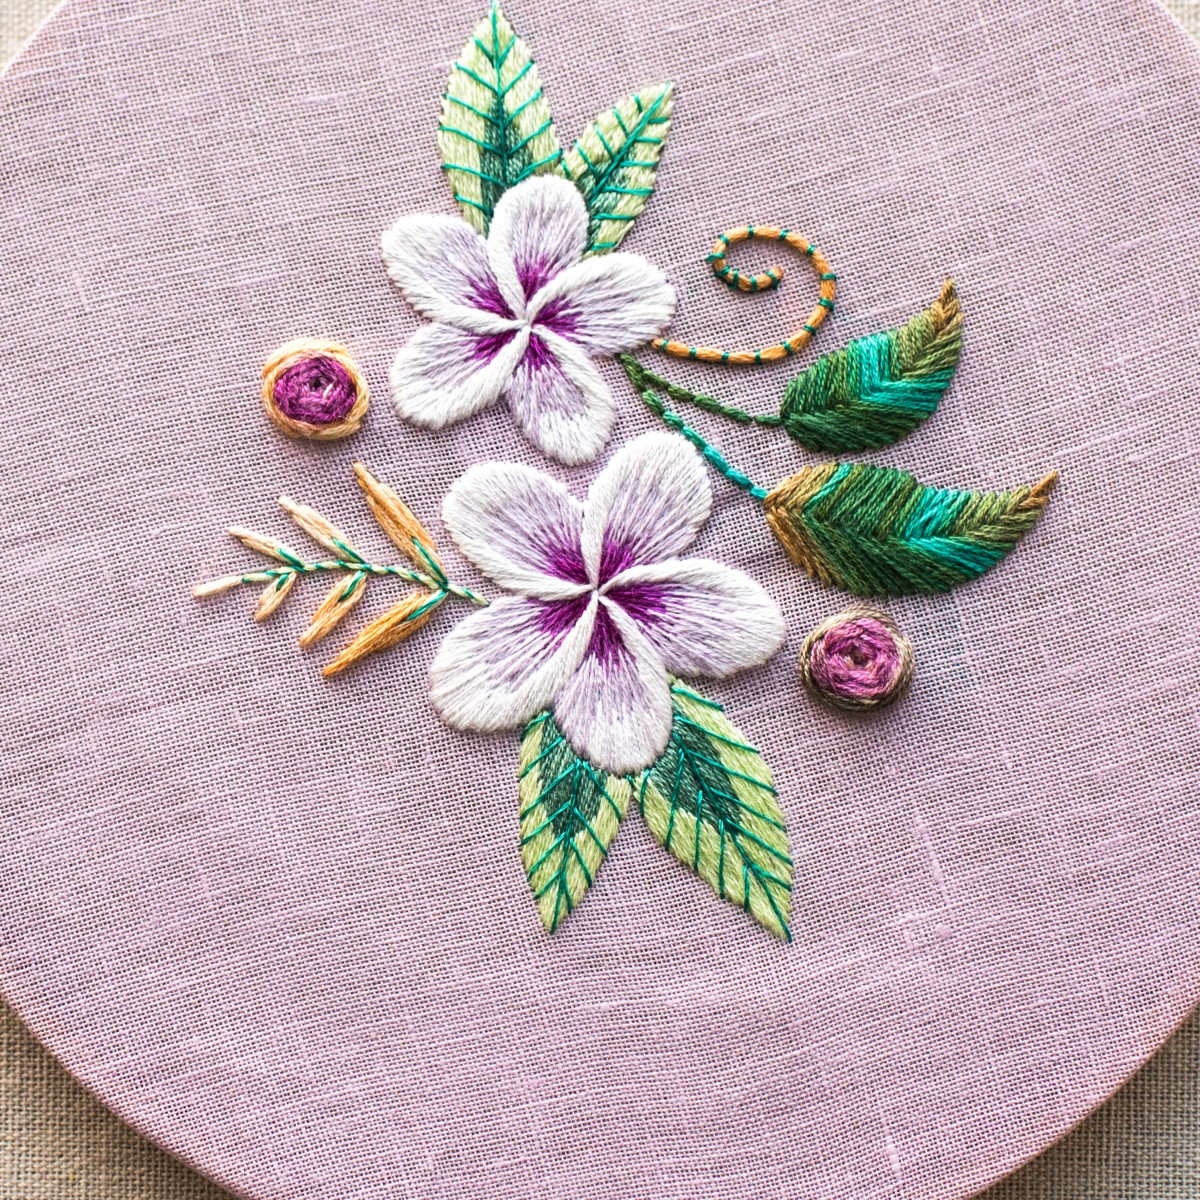 Embroidery Flower Pattern 7 Beautiful Ways To Hand Embroider Flowers